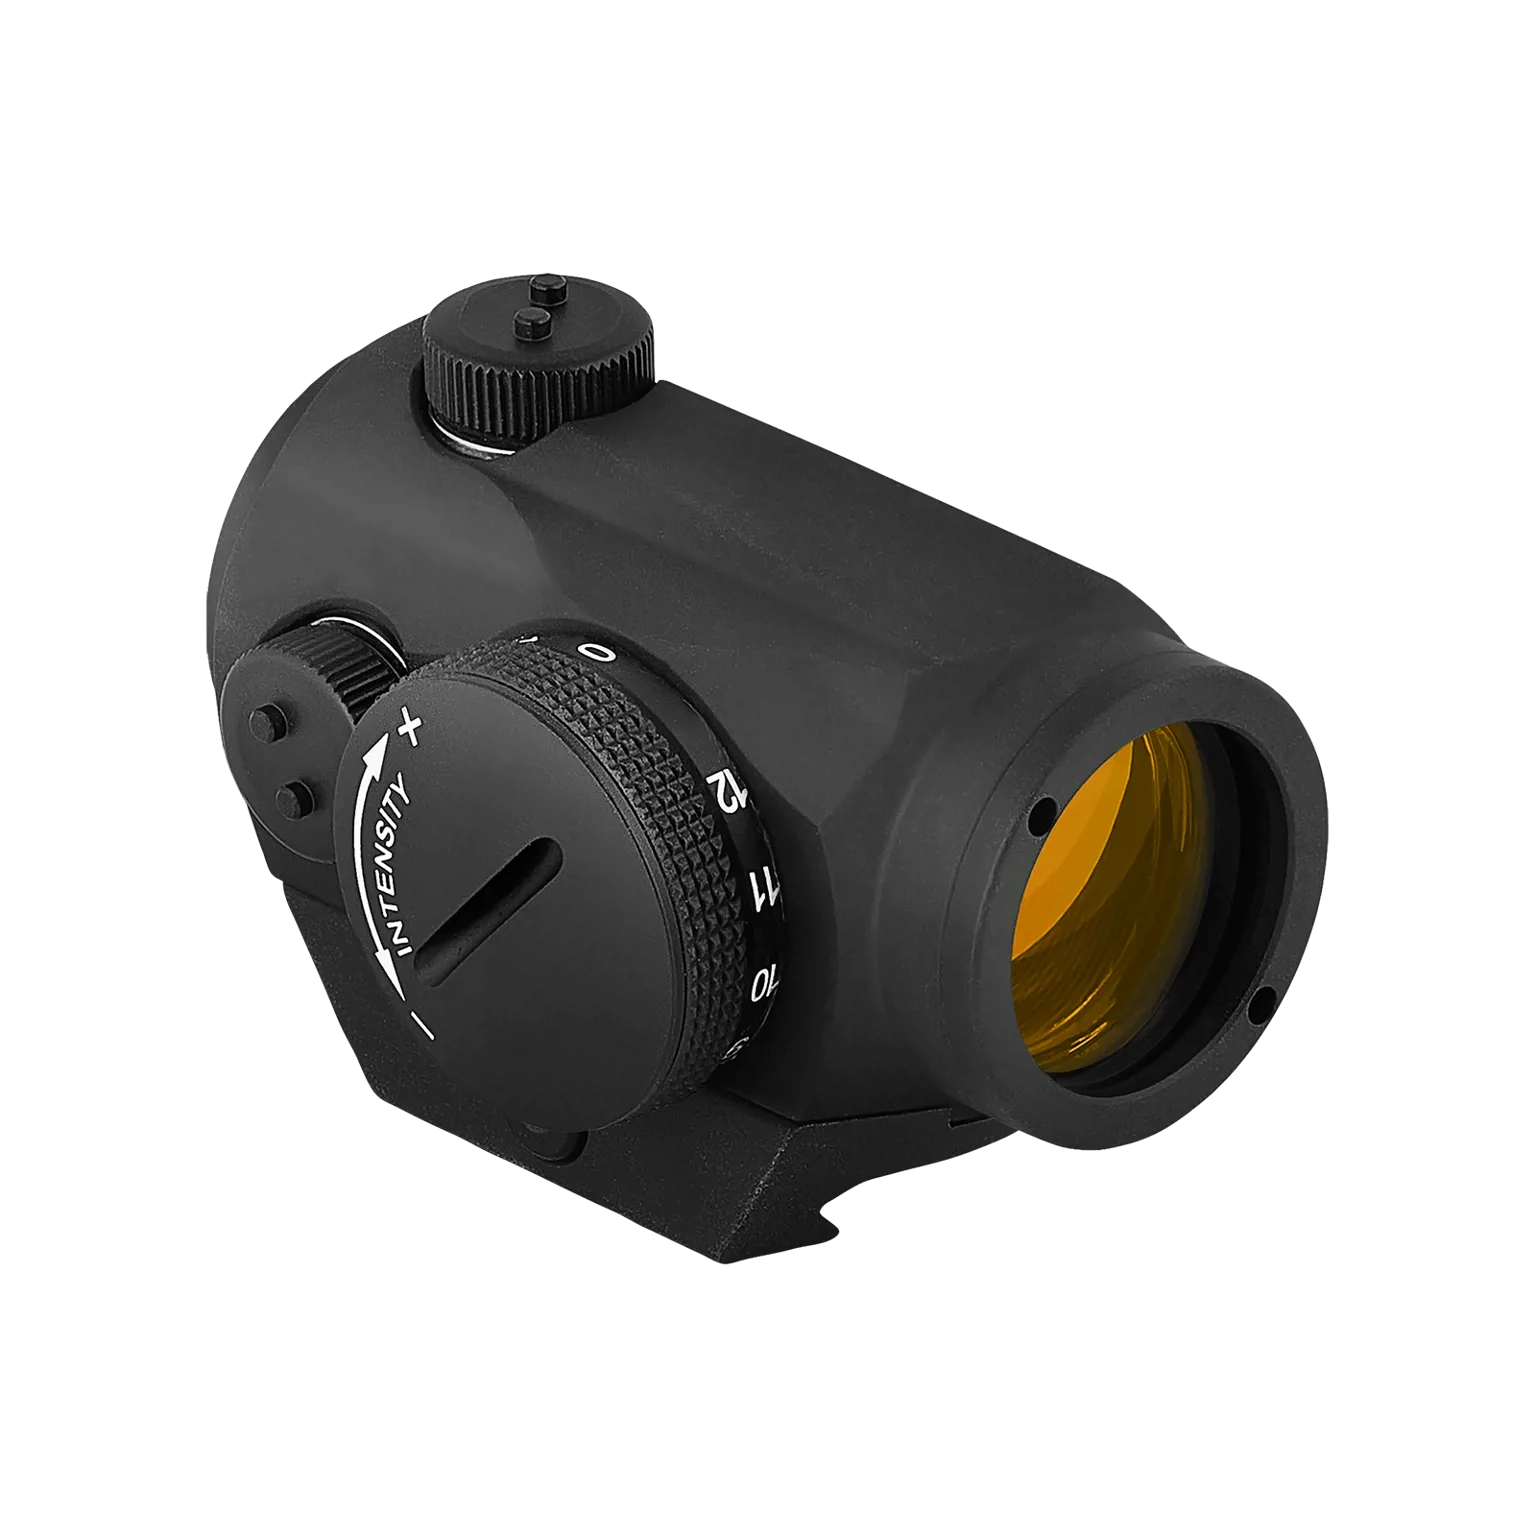 Micro H-1™ 4 MOA - Red dot reflex sight with standard mount for Weaver/Picatinny - 3